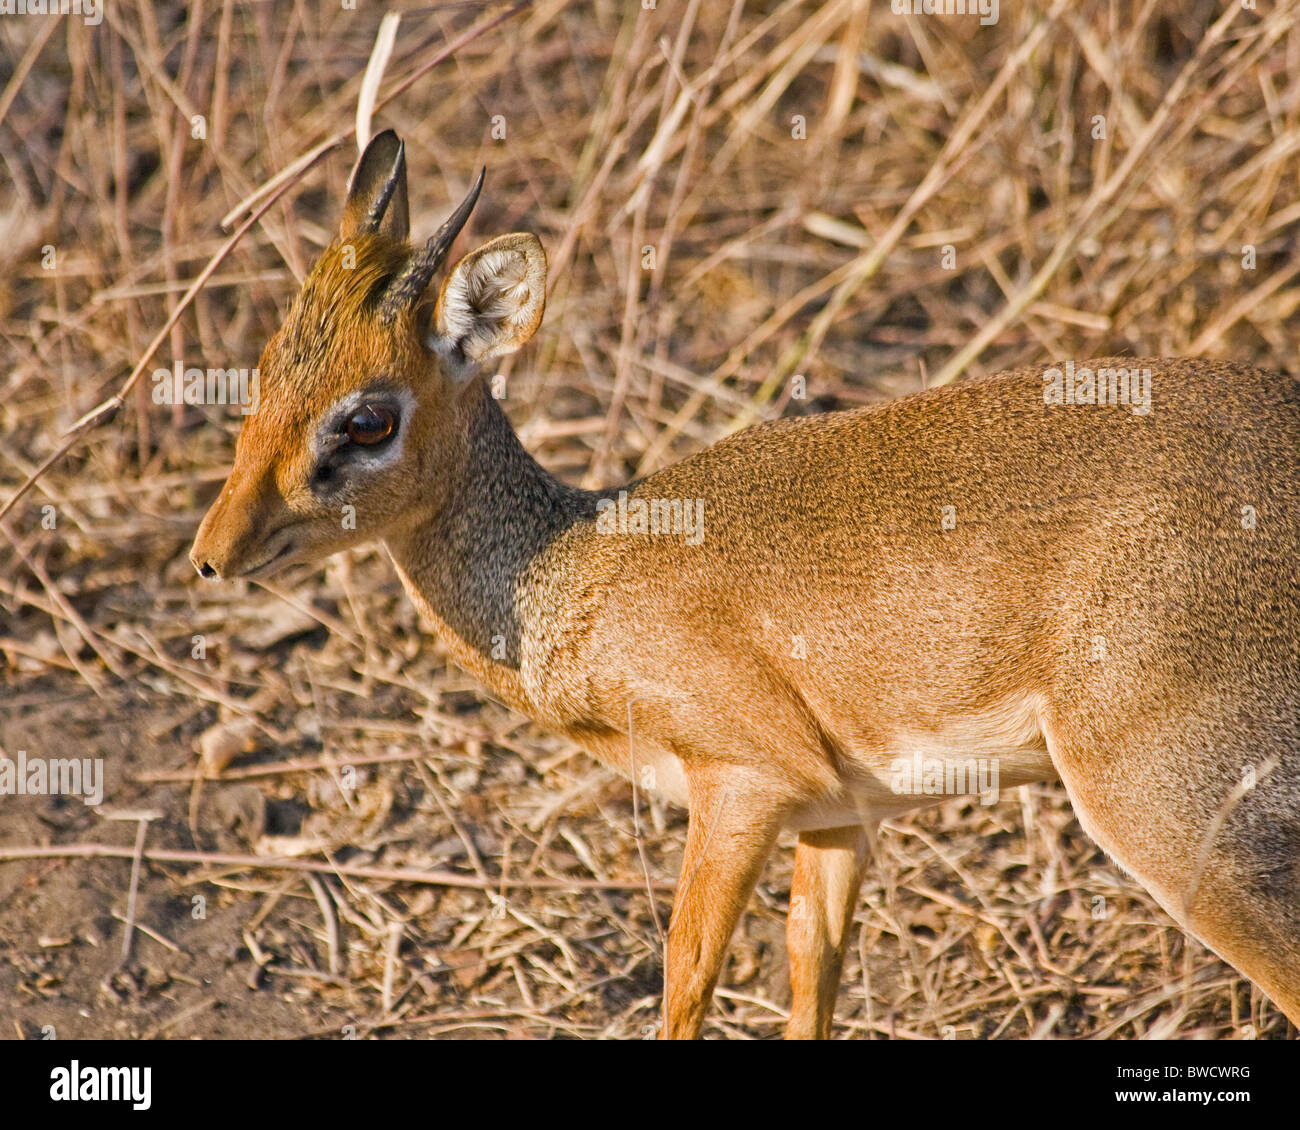 A small dik dik (a type of antelope) looks skittishly at the new visitors on an African safari. Stock Photo